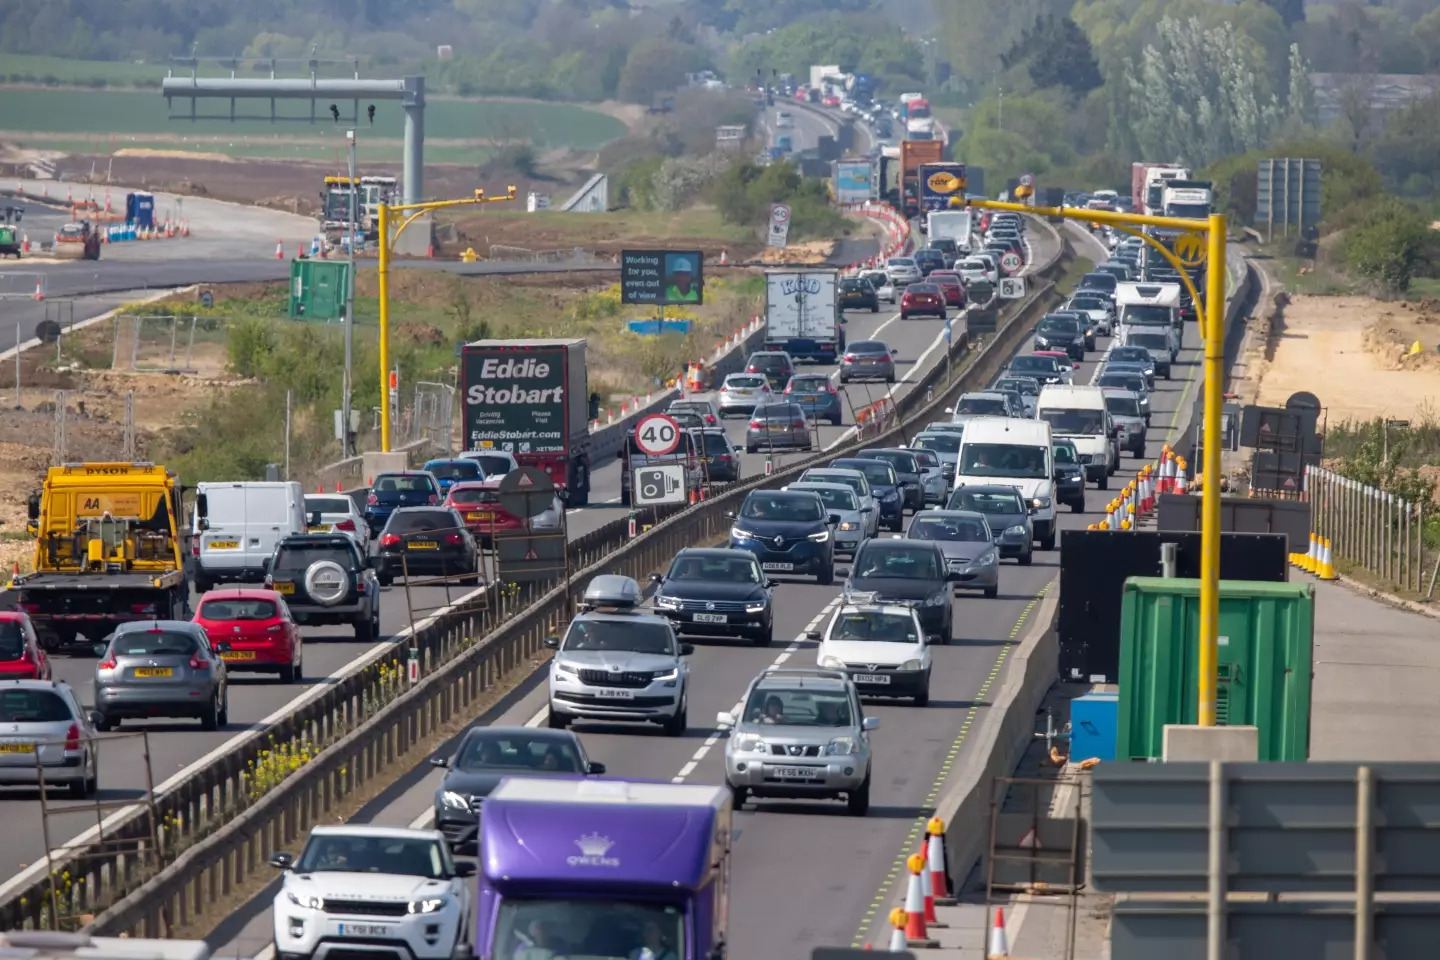 The Department for Transport has warned drivers about heavy traffic across the Easter weekend.